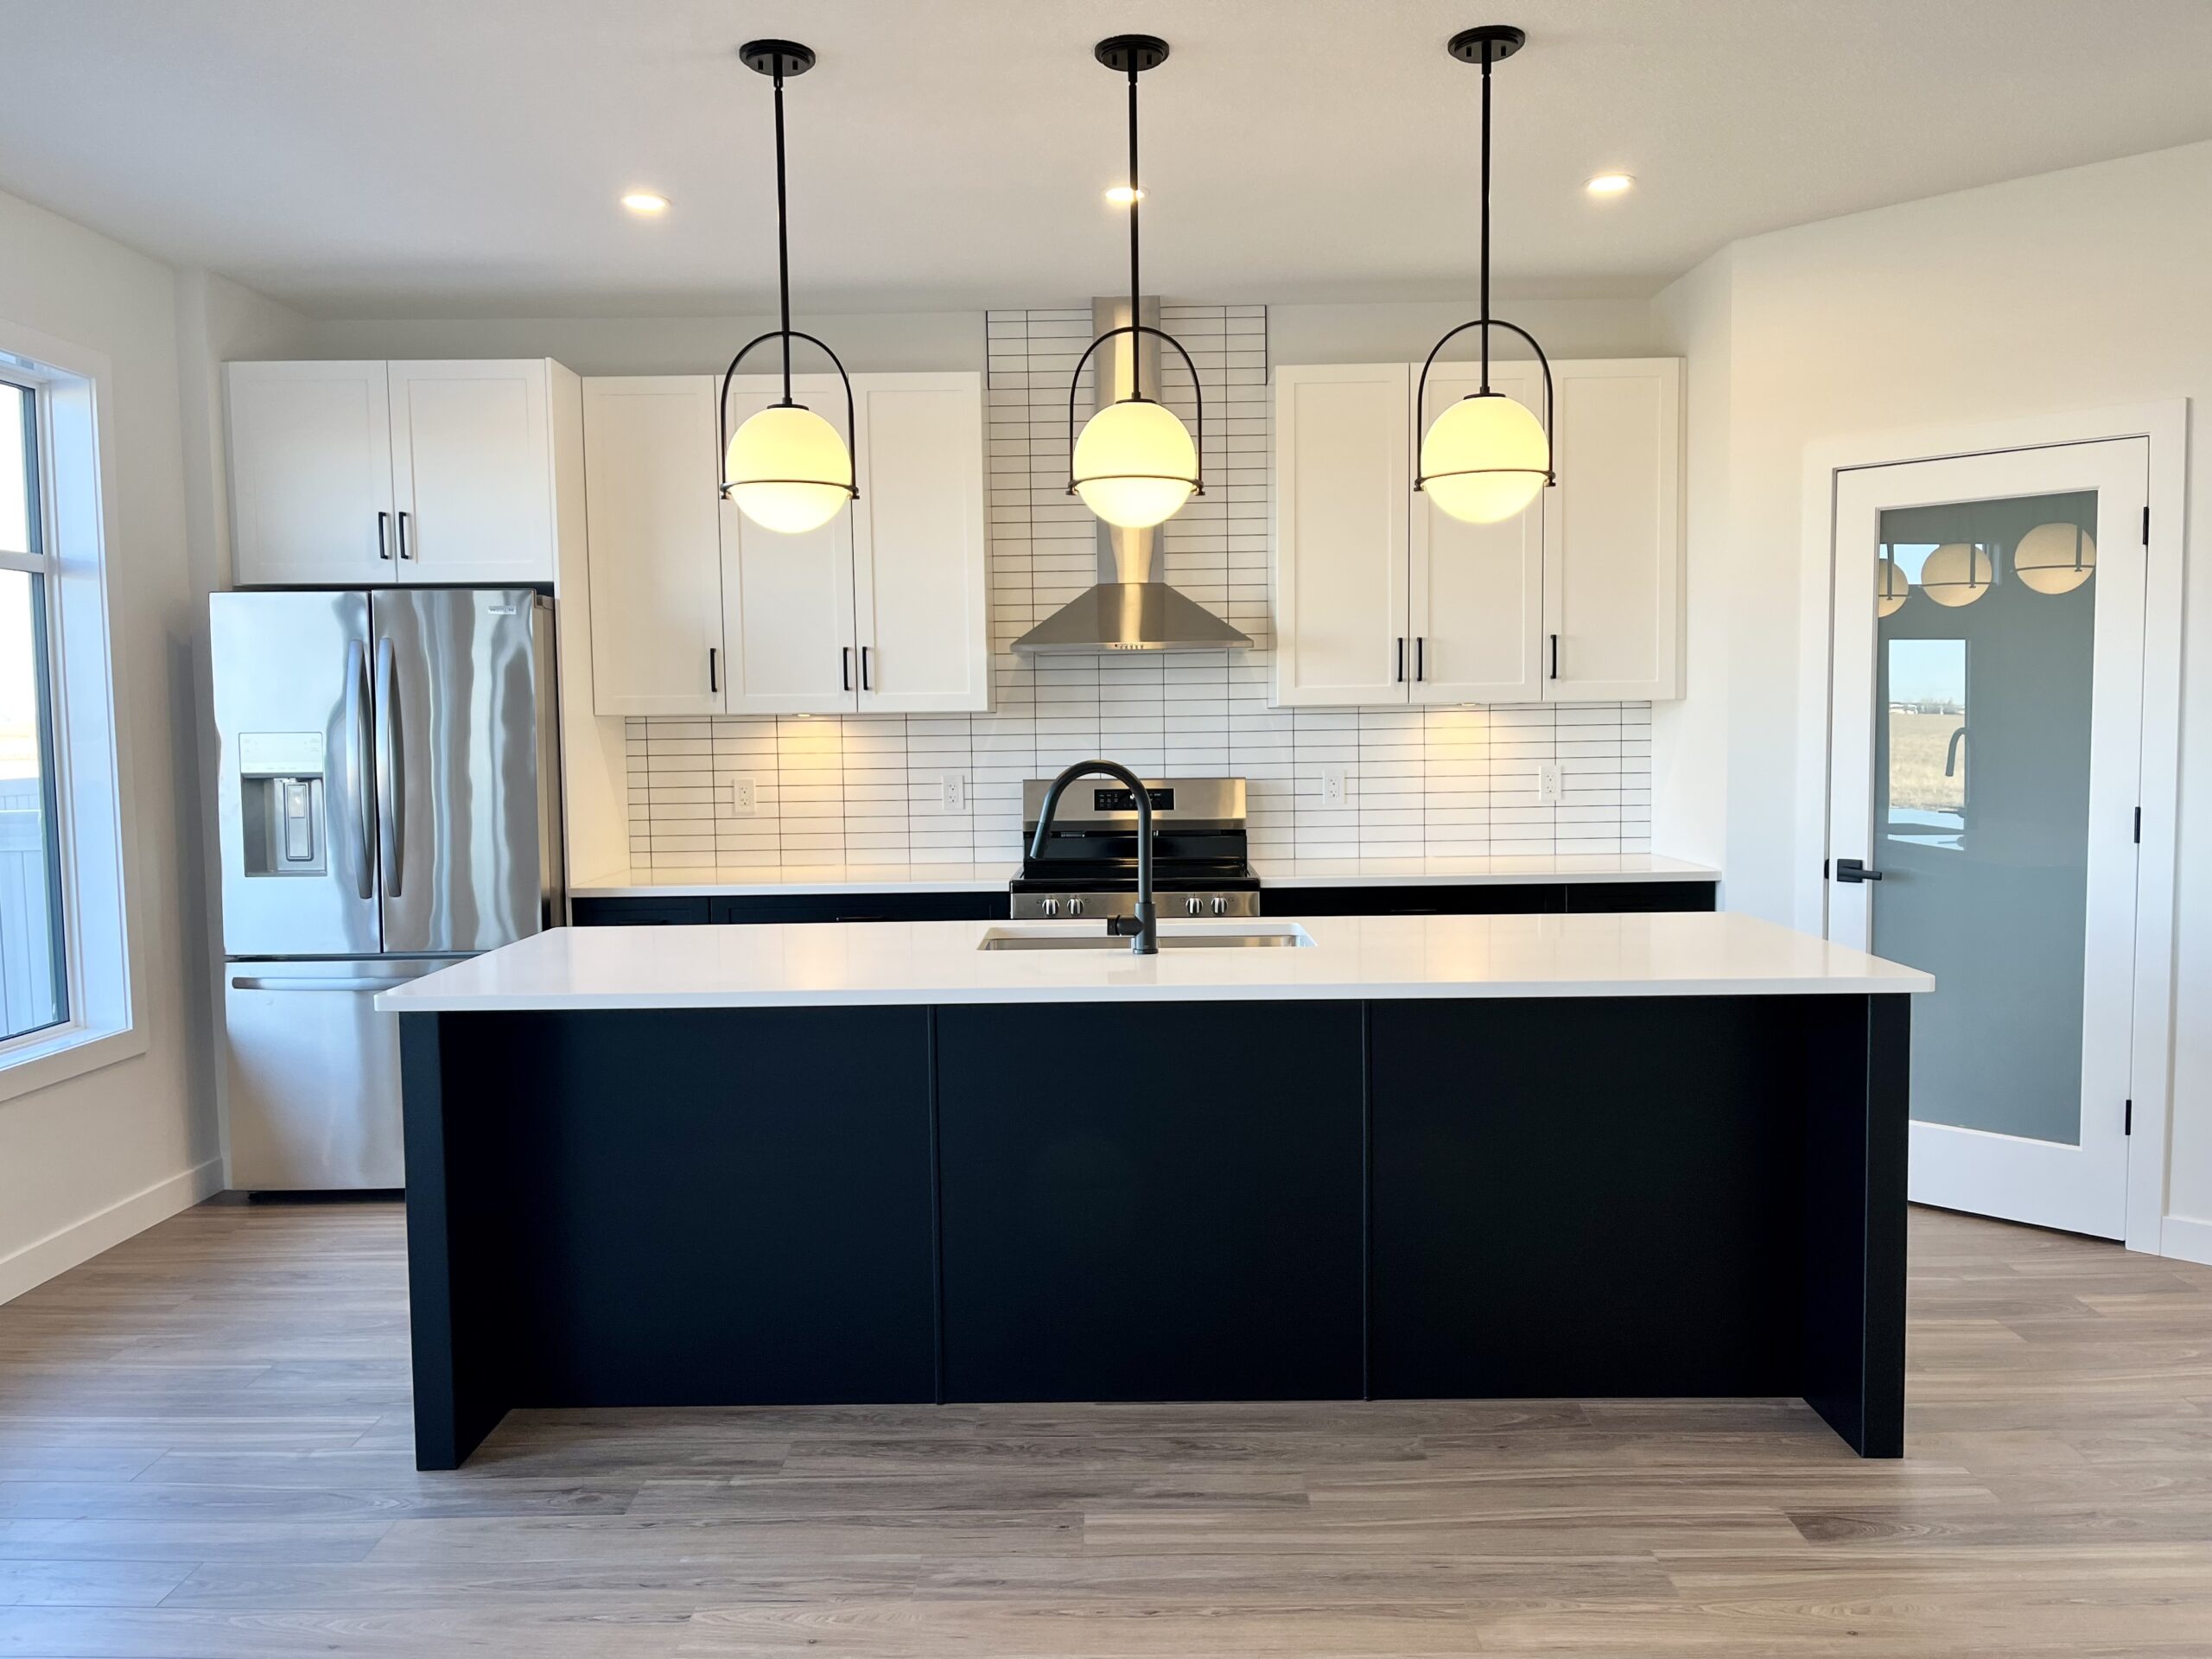 A kitchen with white cabinets and black counter tops.